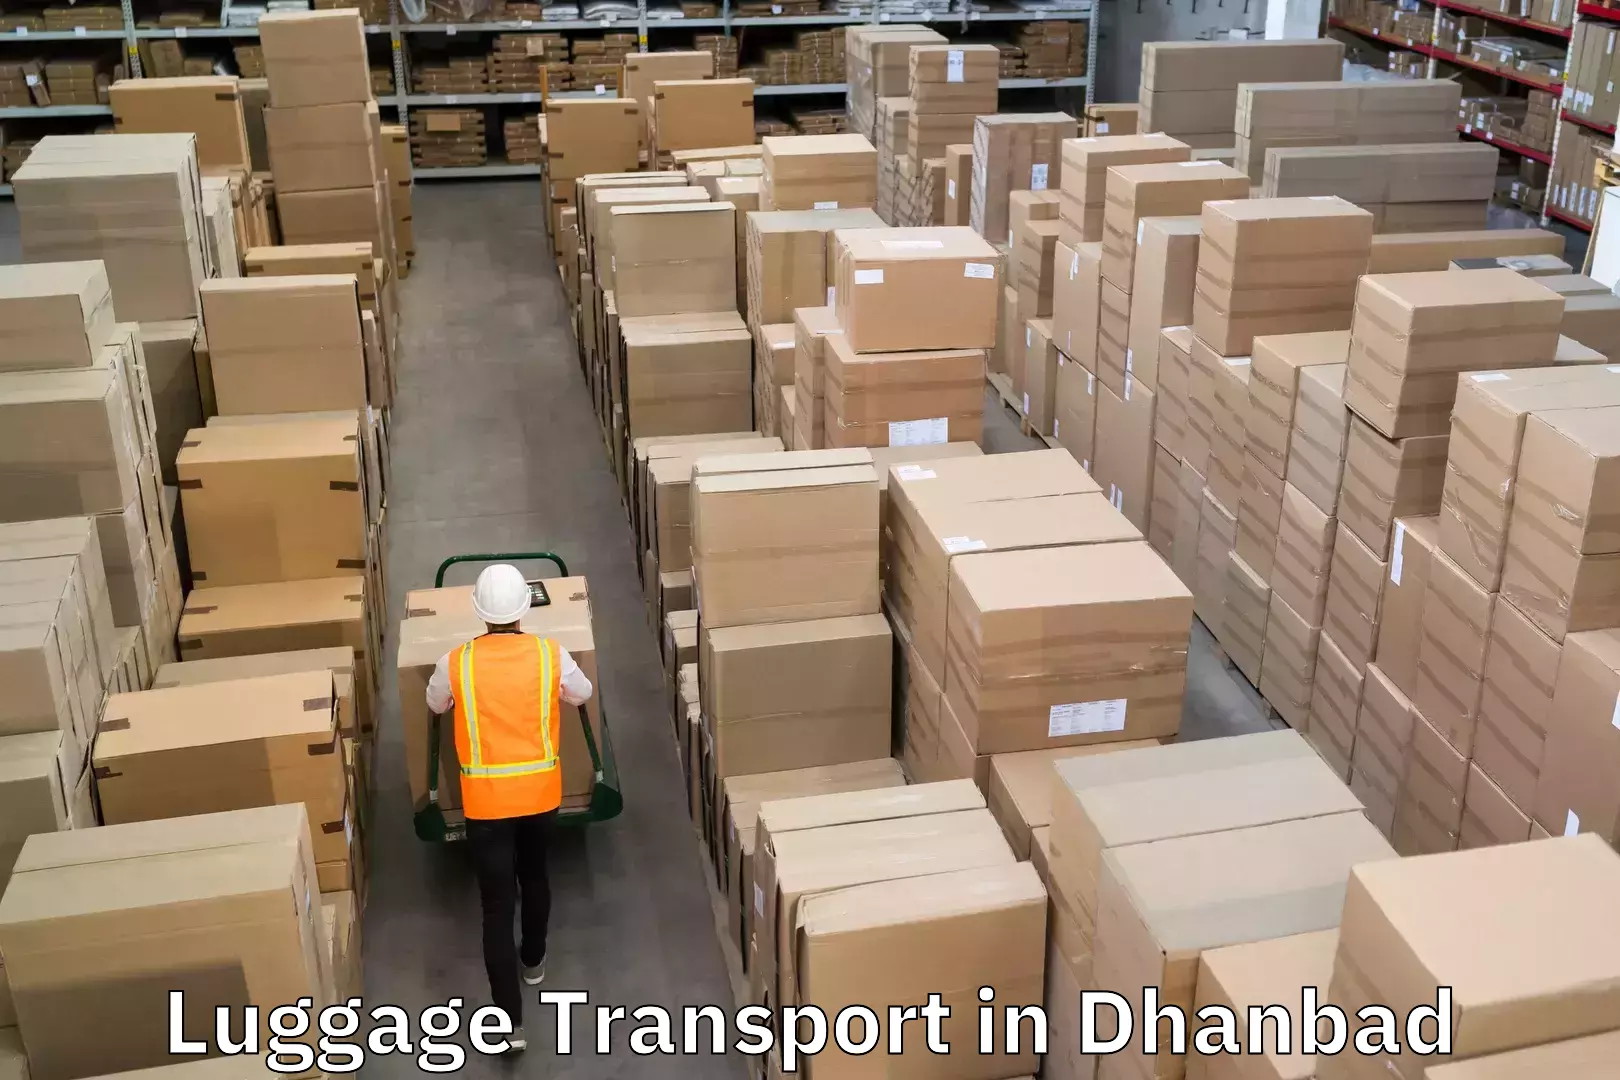 Corporate baggage transport in Dhanbad